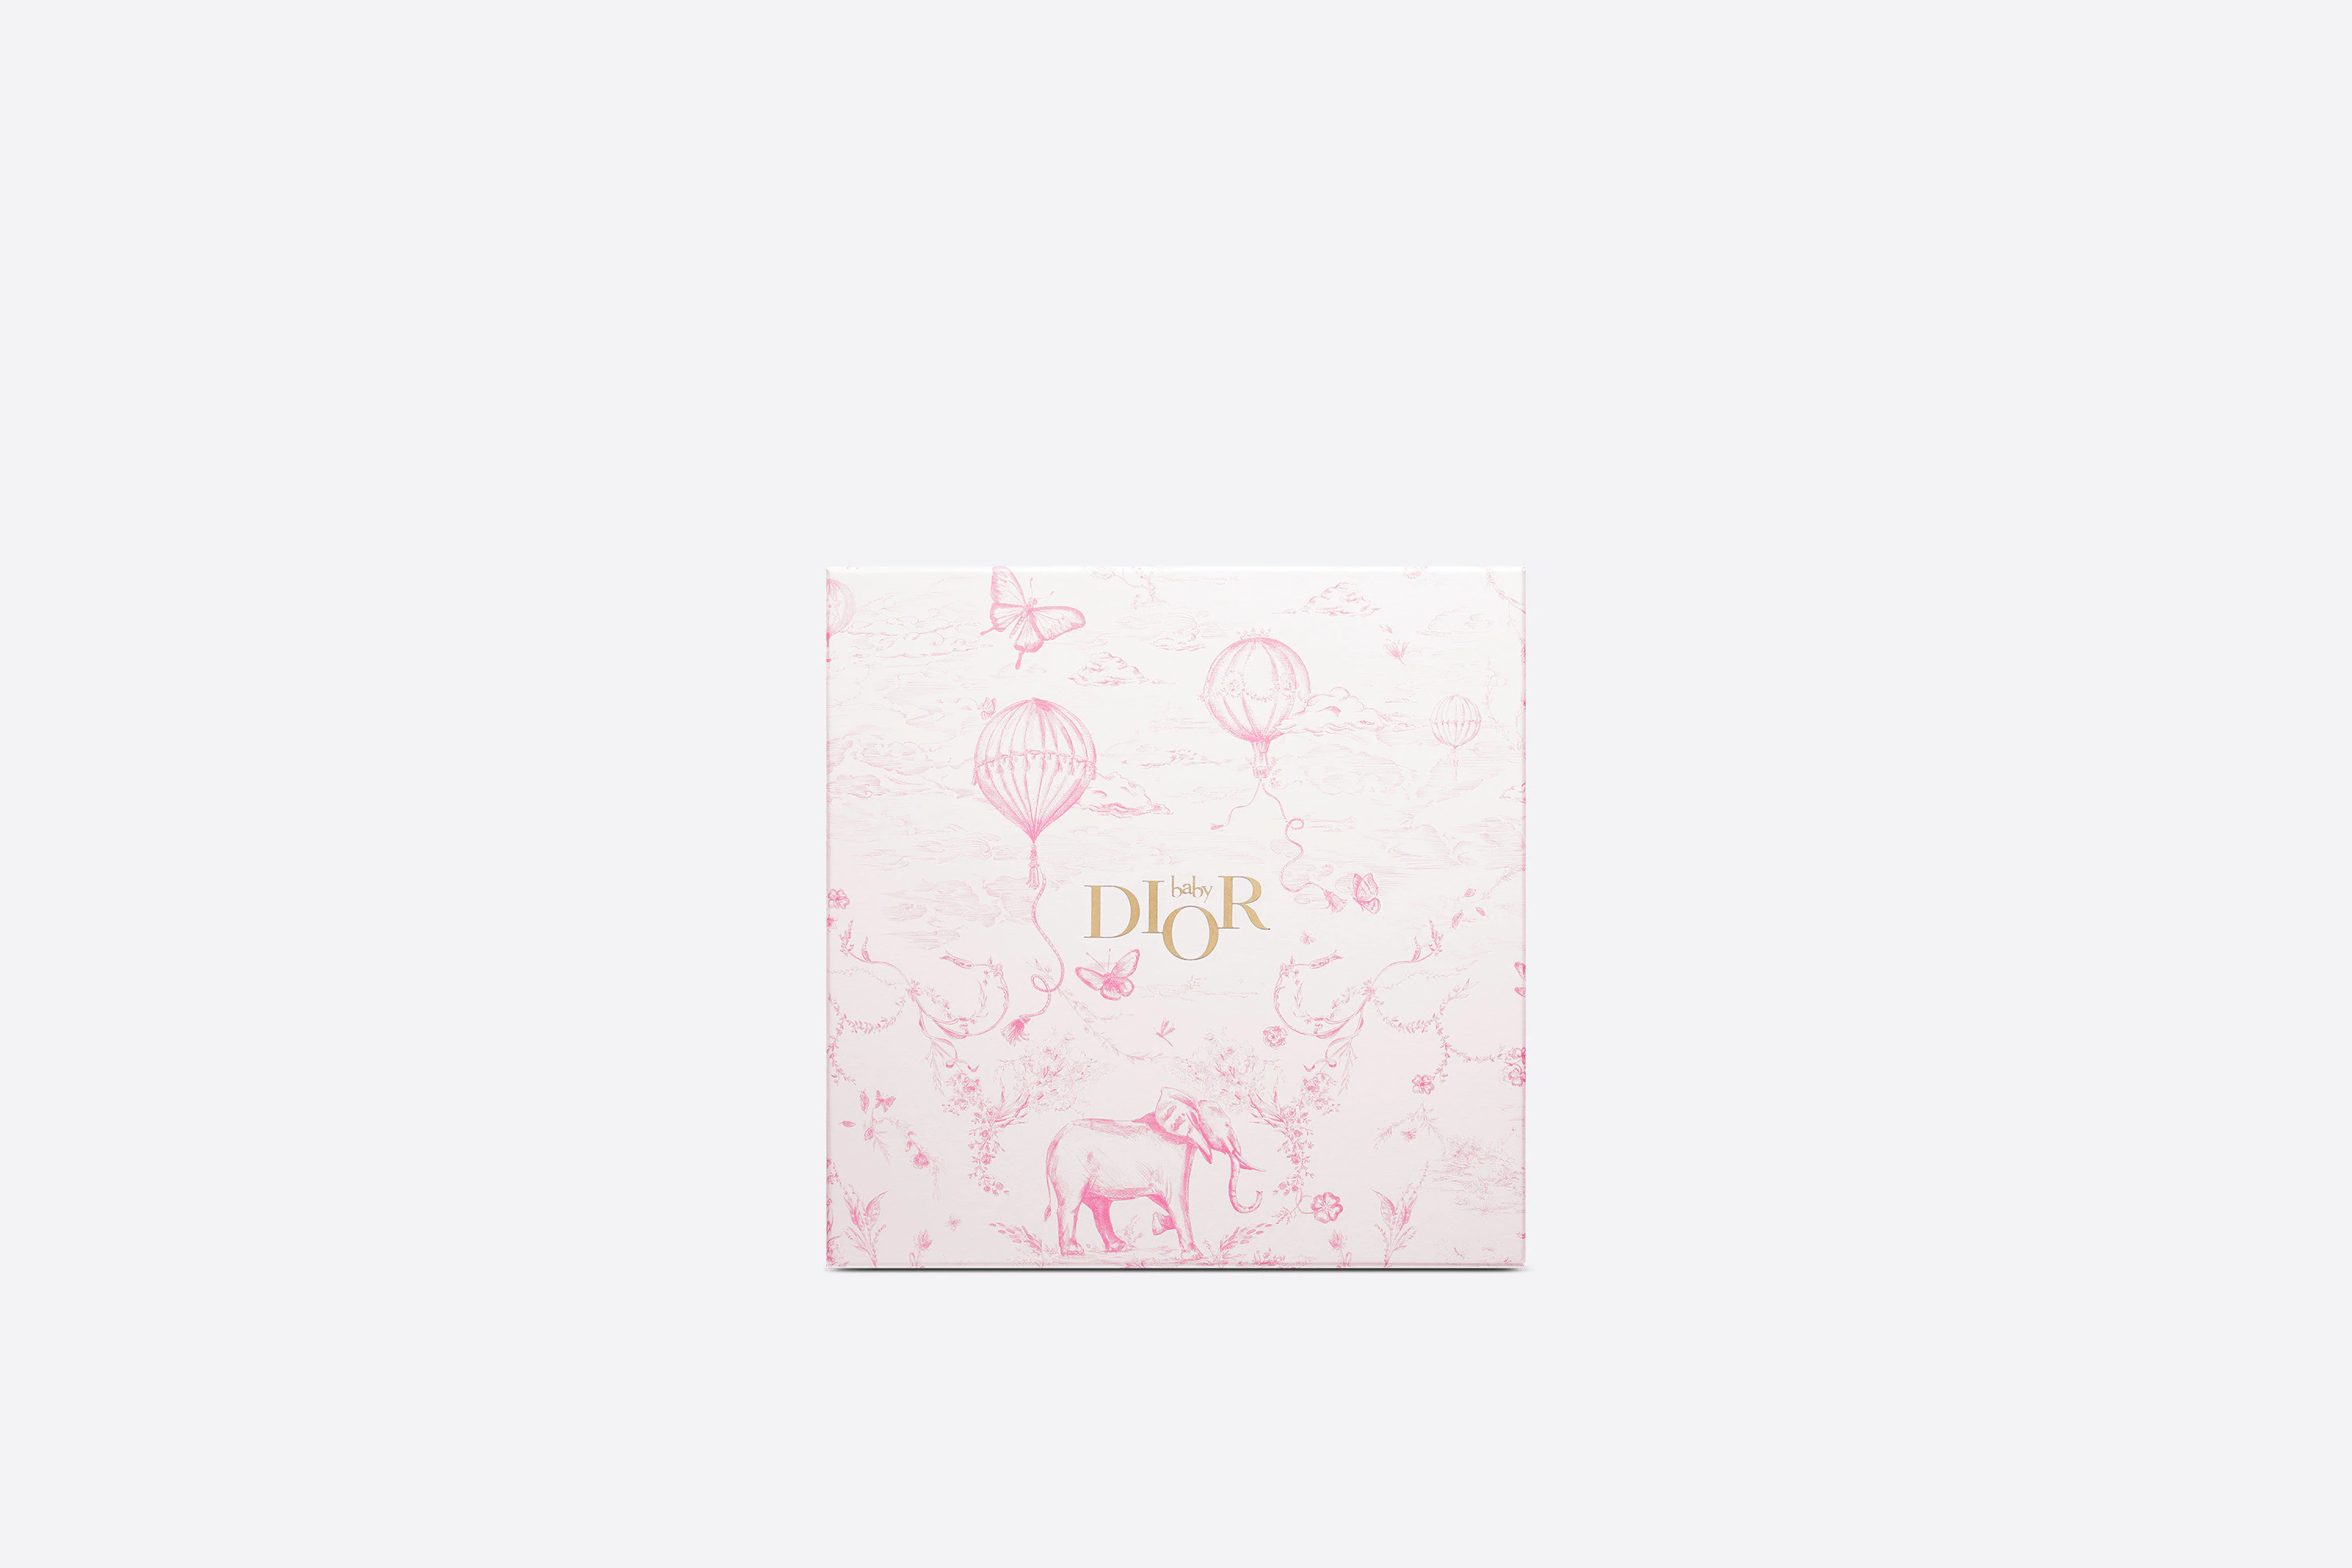 A white Dior gift box with a pink elephant, balloon, and butterfly illustration - Dior